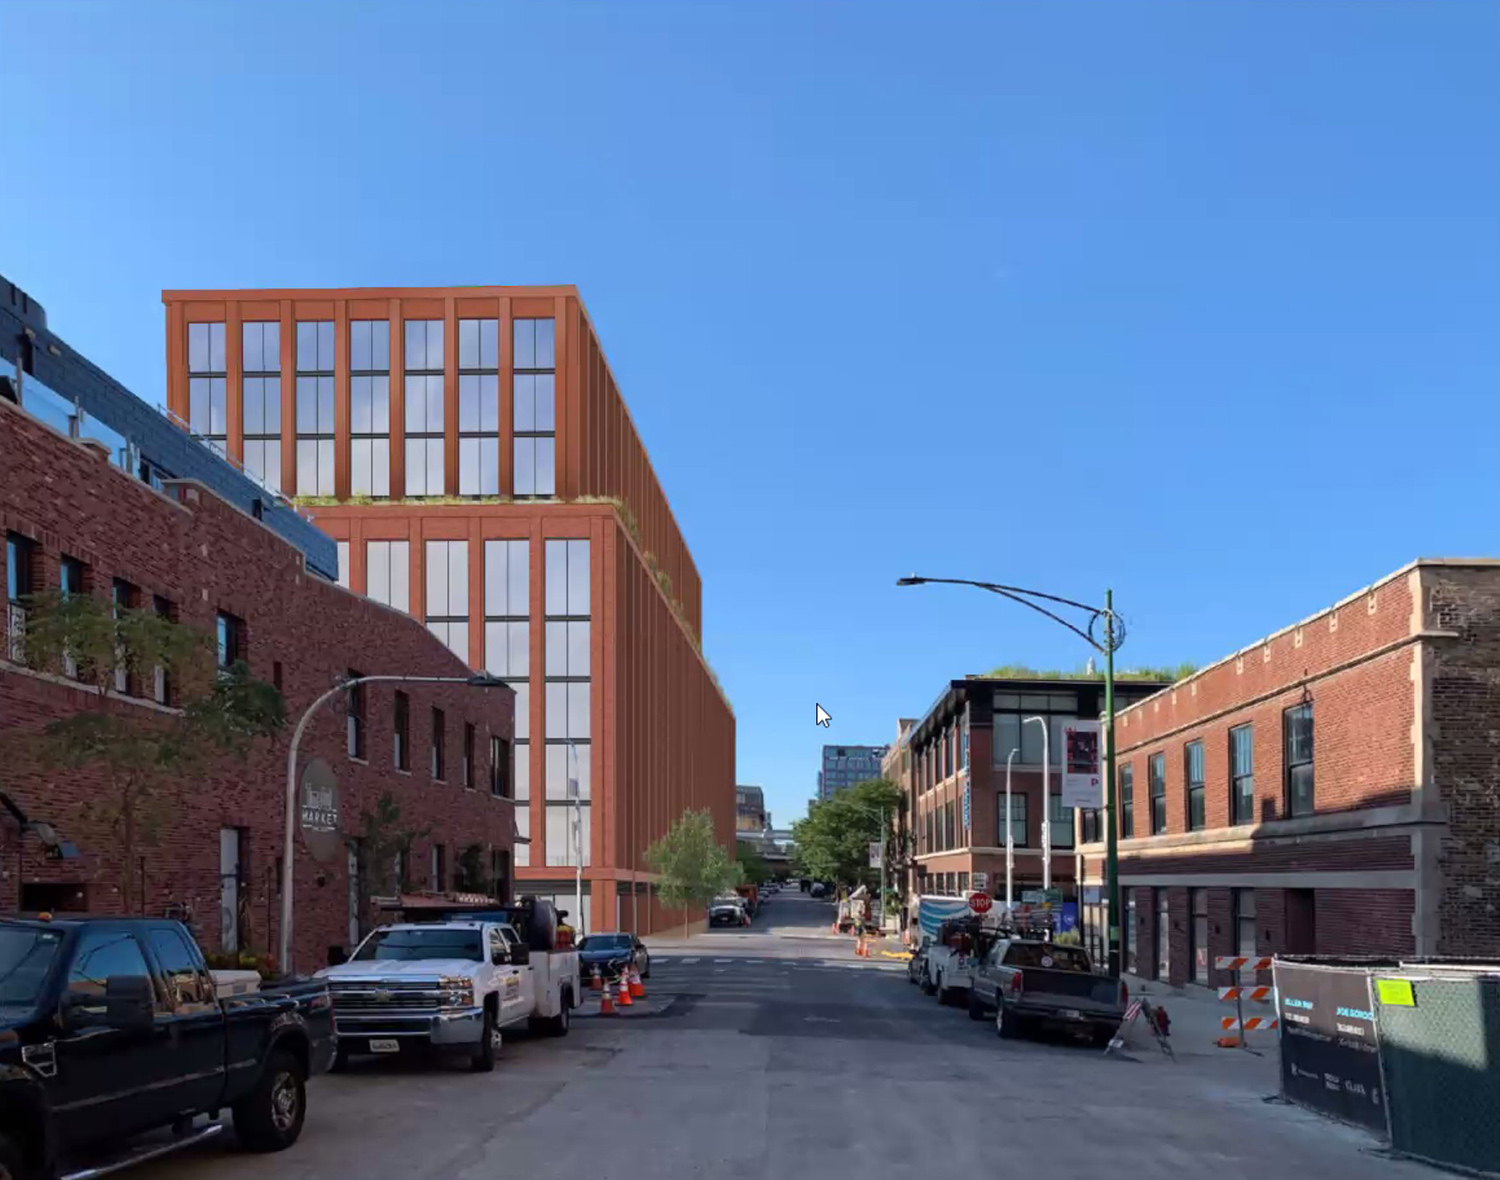 View of 917 W Fulton Market. Rendering by Morris Adjmi Architects